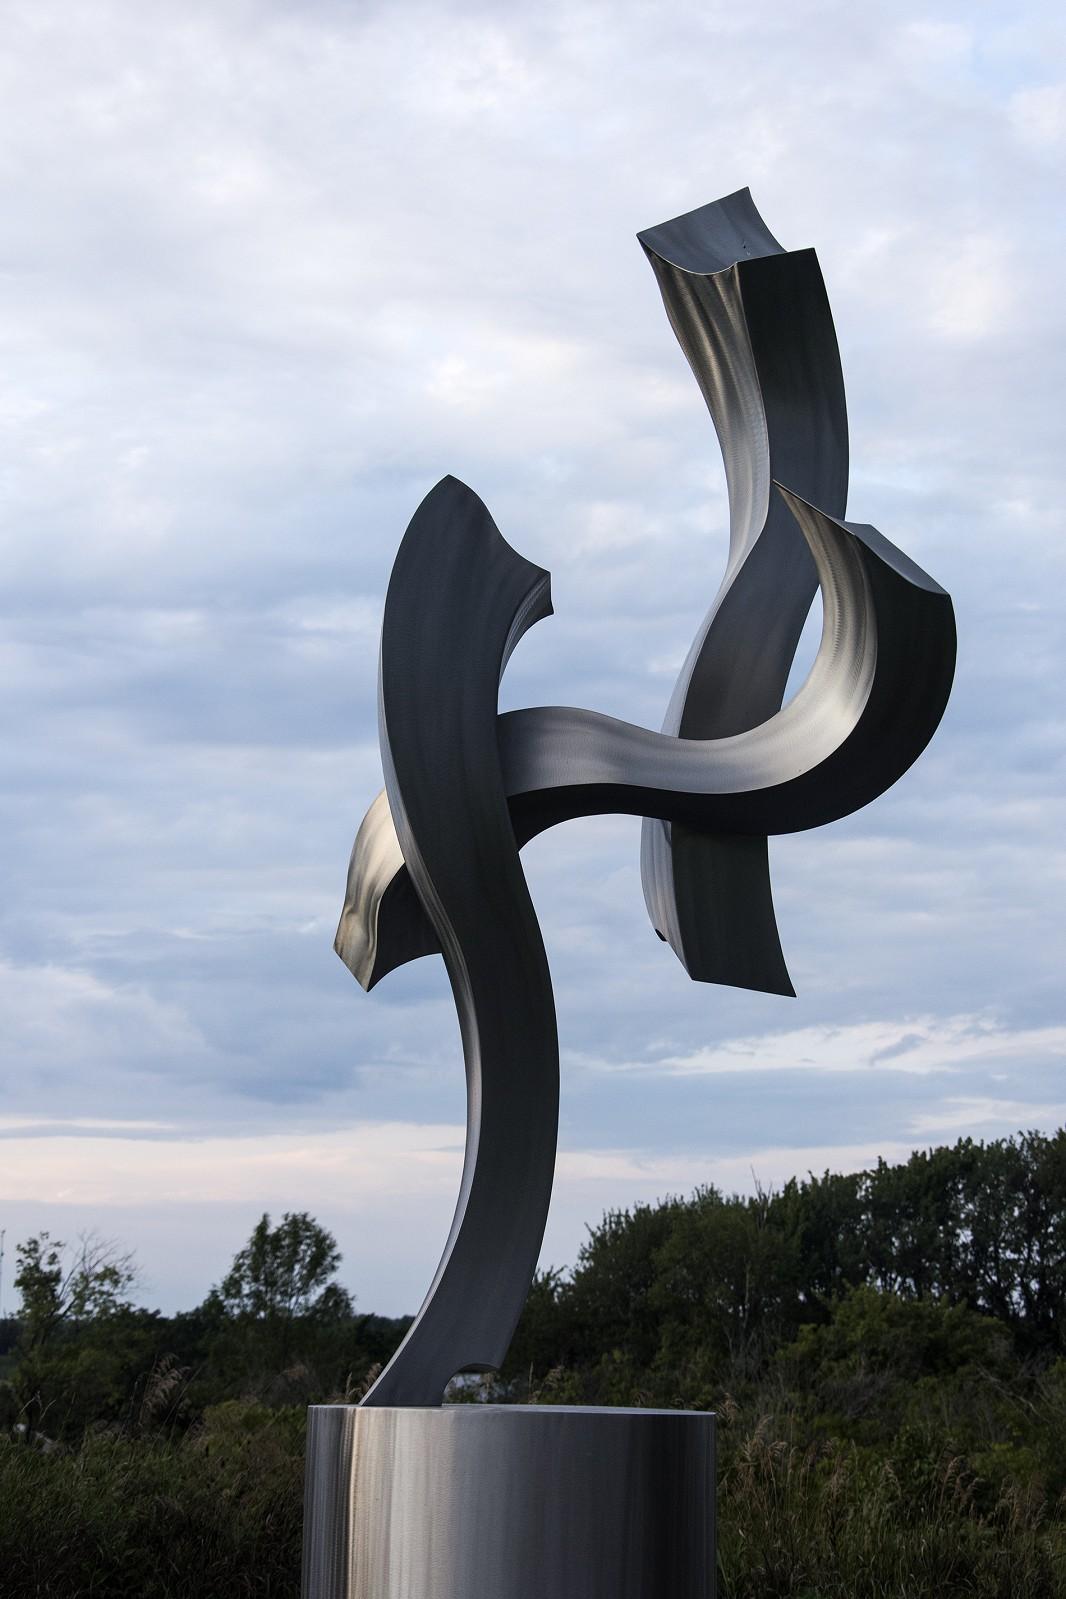 This elegant abstract metal sculpture by American artist, Kevin Robb is designed to play with natural light and shadow. Highly polished stainless steel is shaped into three dramatic curves that appear weightless. 

Robb’s work reflects a deep